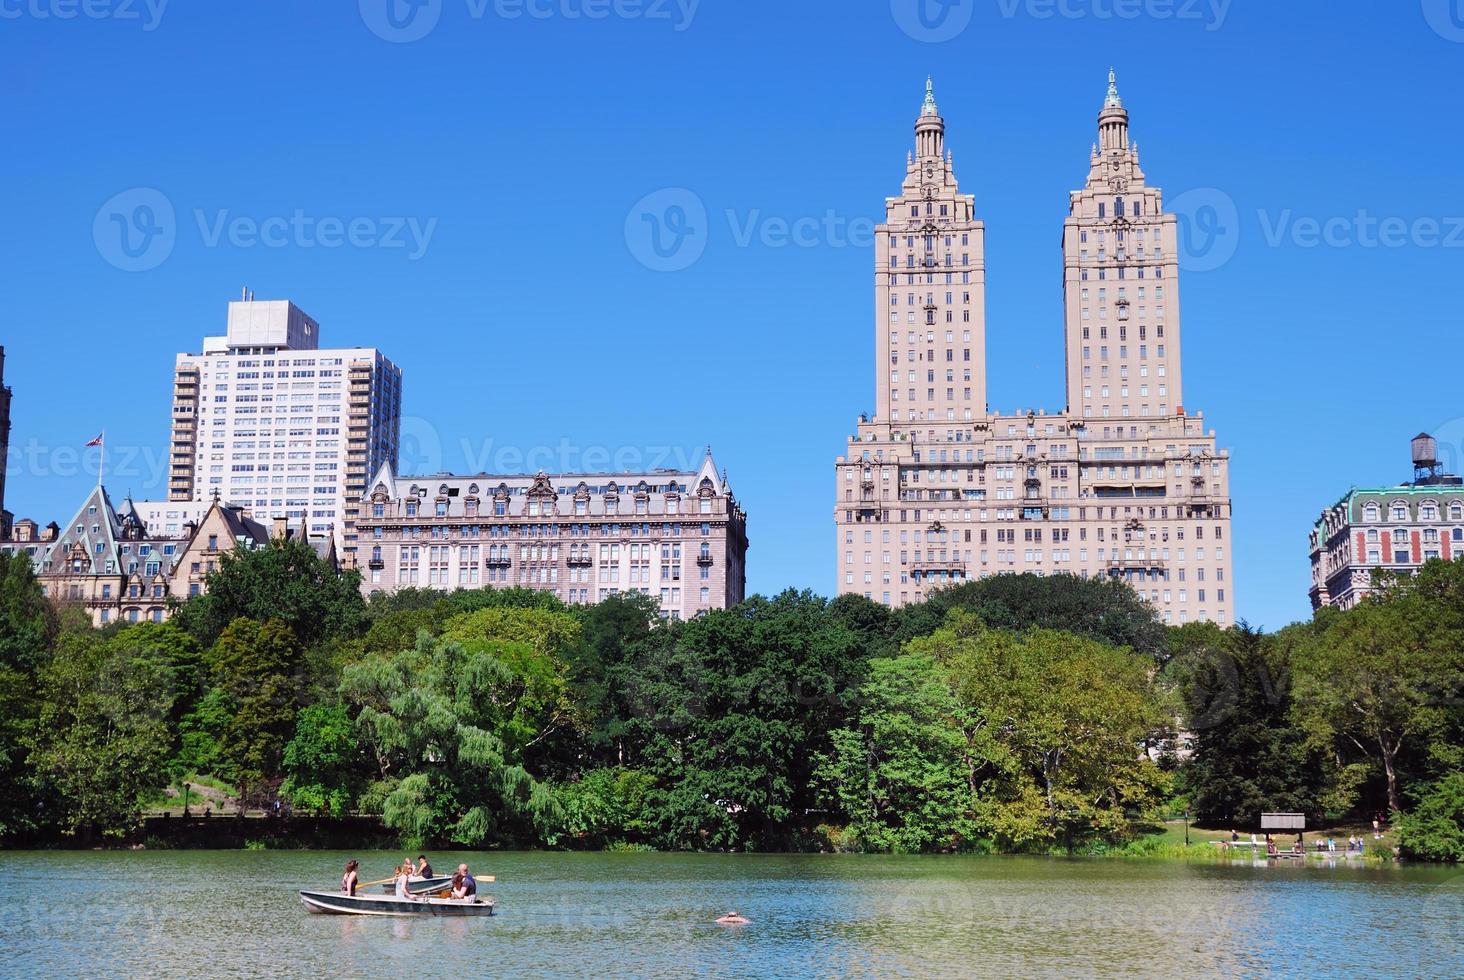 New York City Central Park with boat in lake photo